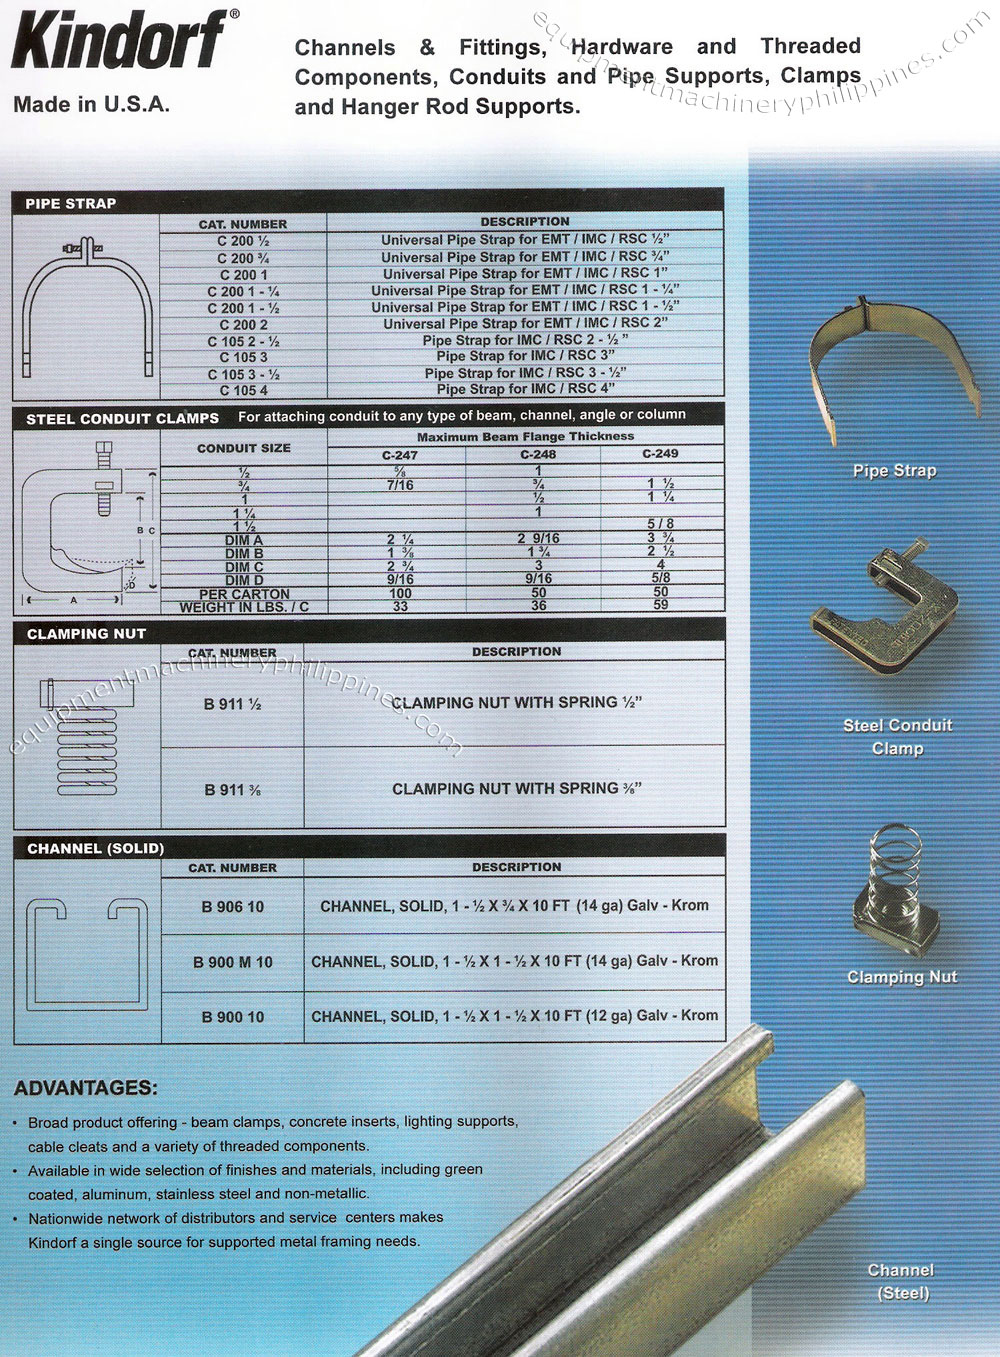 Kindorf Channels and Fittings, Hardware and Threaded Components, Conduits and Pipe Supports, Clamps and Hanger Rod Supports